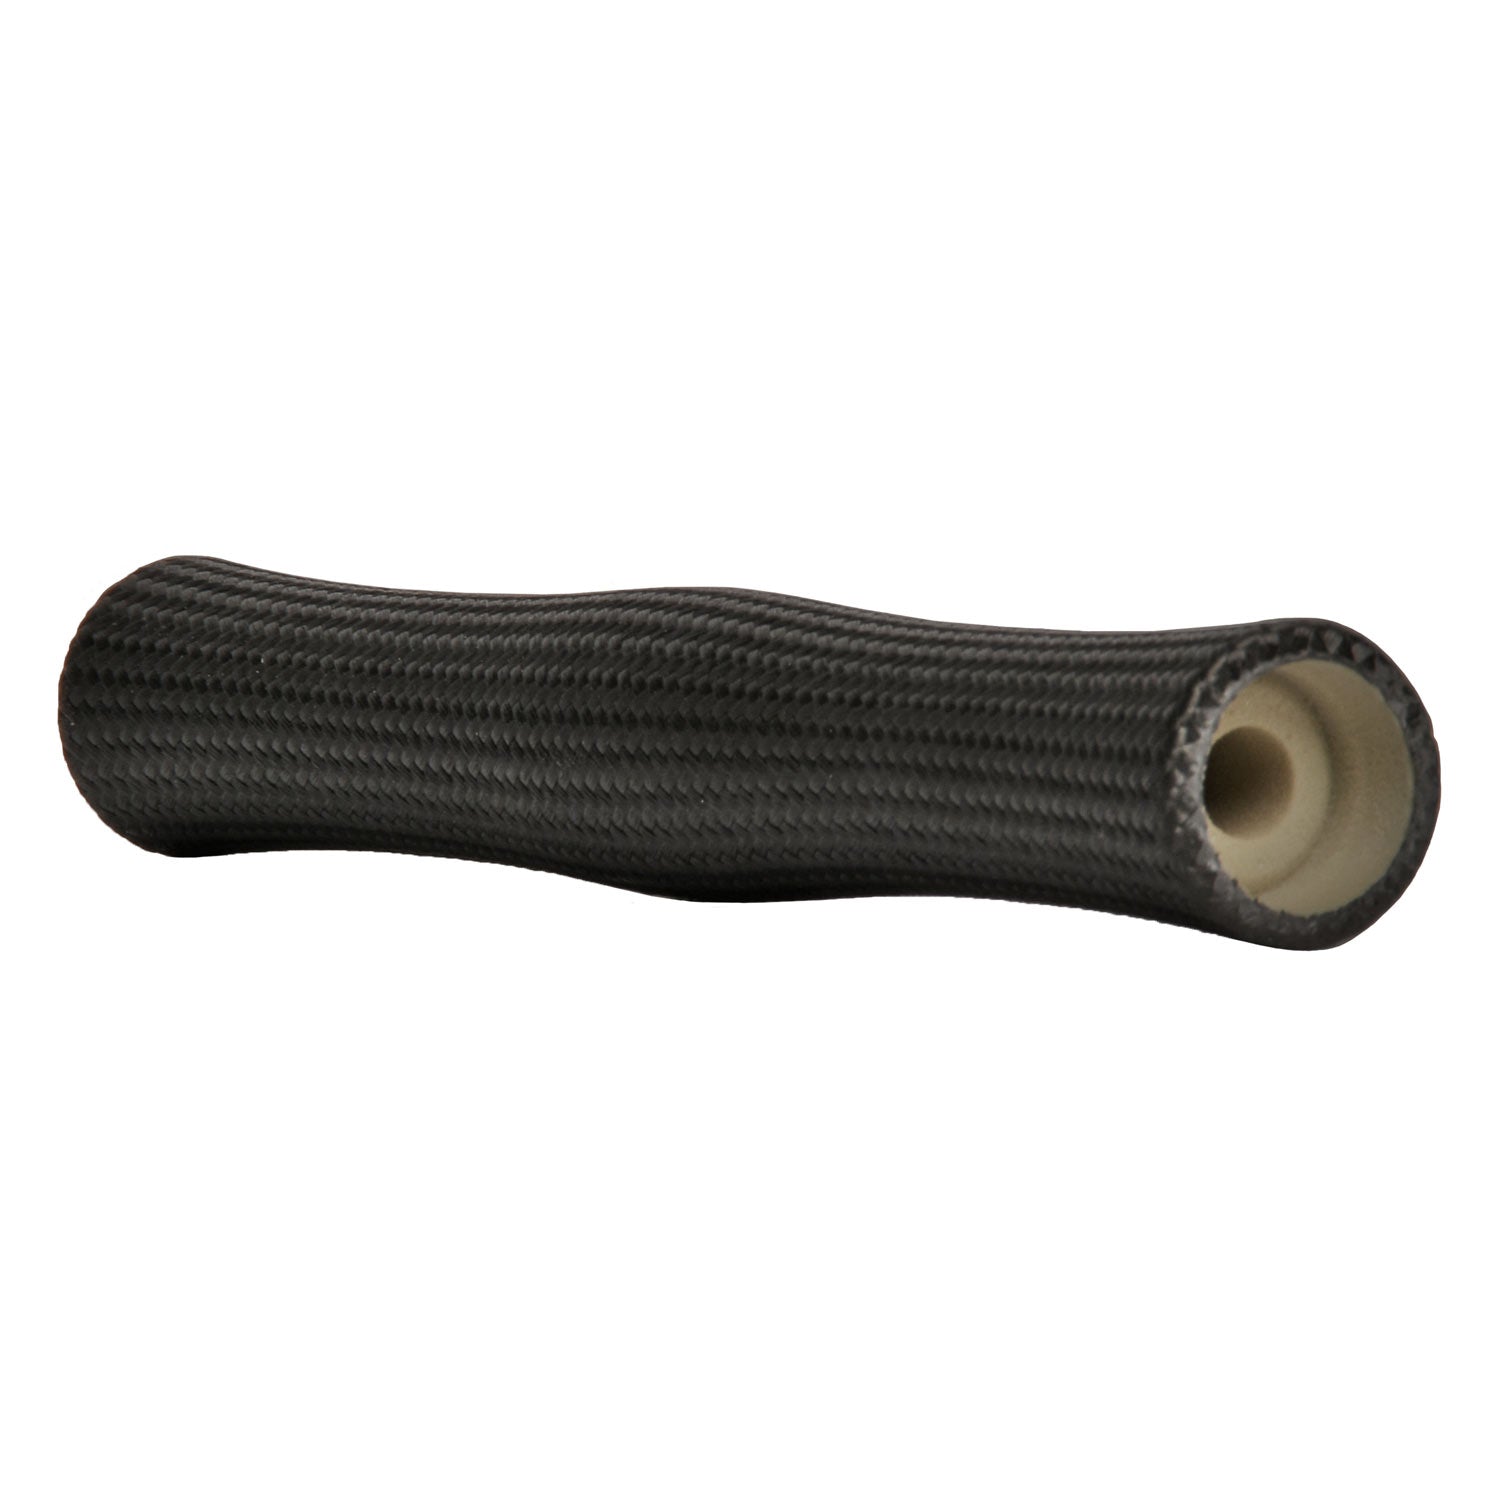 CFX Composite Carbon Fiber Grips - 7.5 Full Wells Fly with Cutout